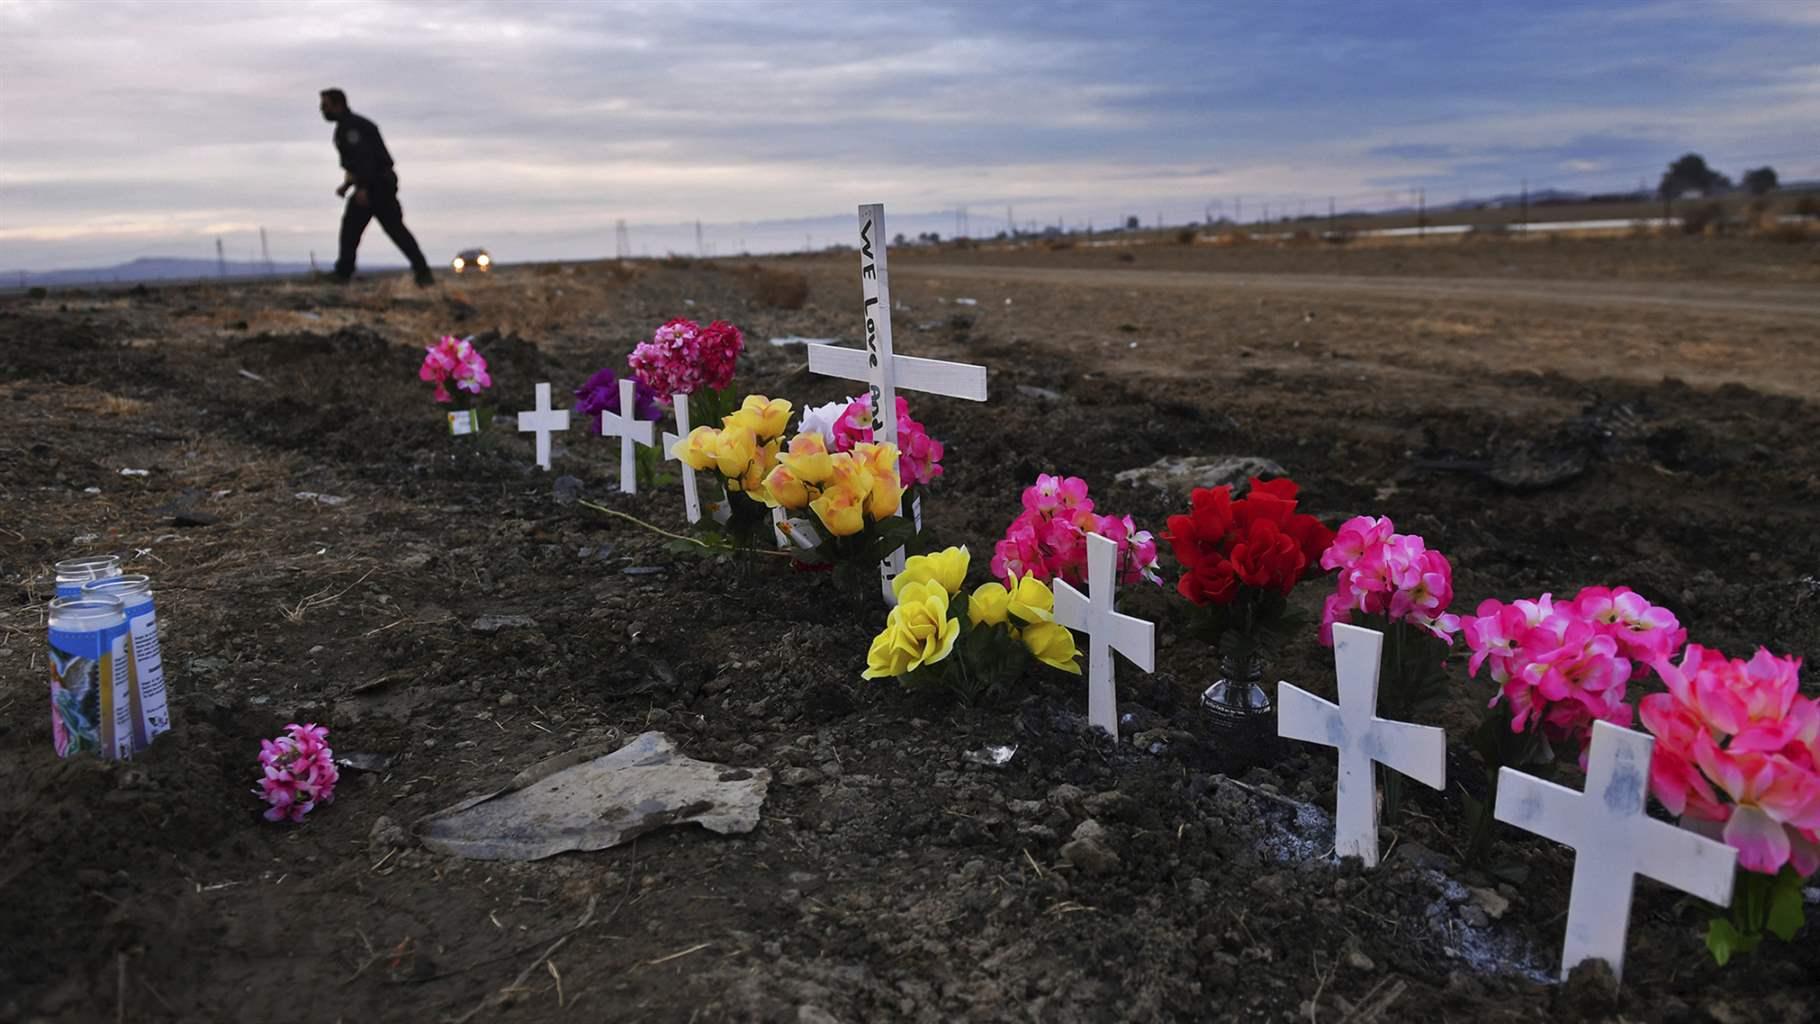 Seven small crosses and one large one create a memorial along Highway 33 as California Highway Patrol officers survey the scene a day after a fatal crash the night before, 13 miles south of Coalinga, Calif., Saturday, Jan. 2, 2021.